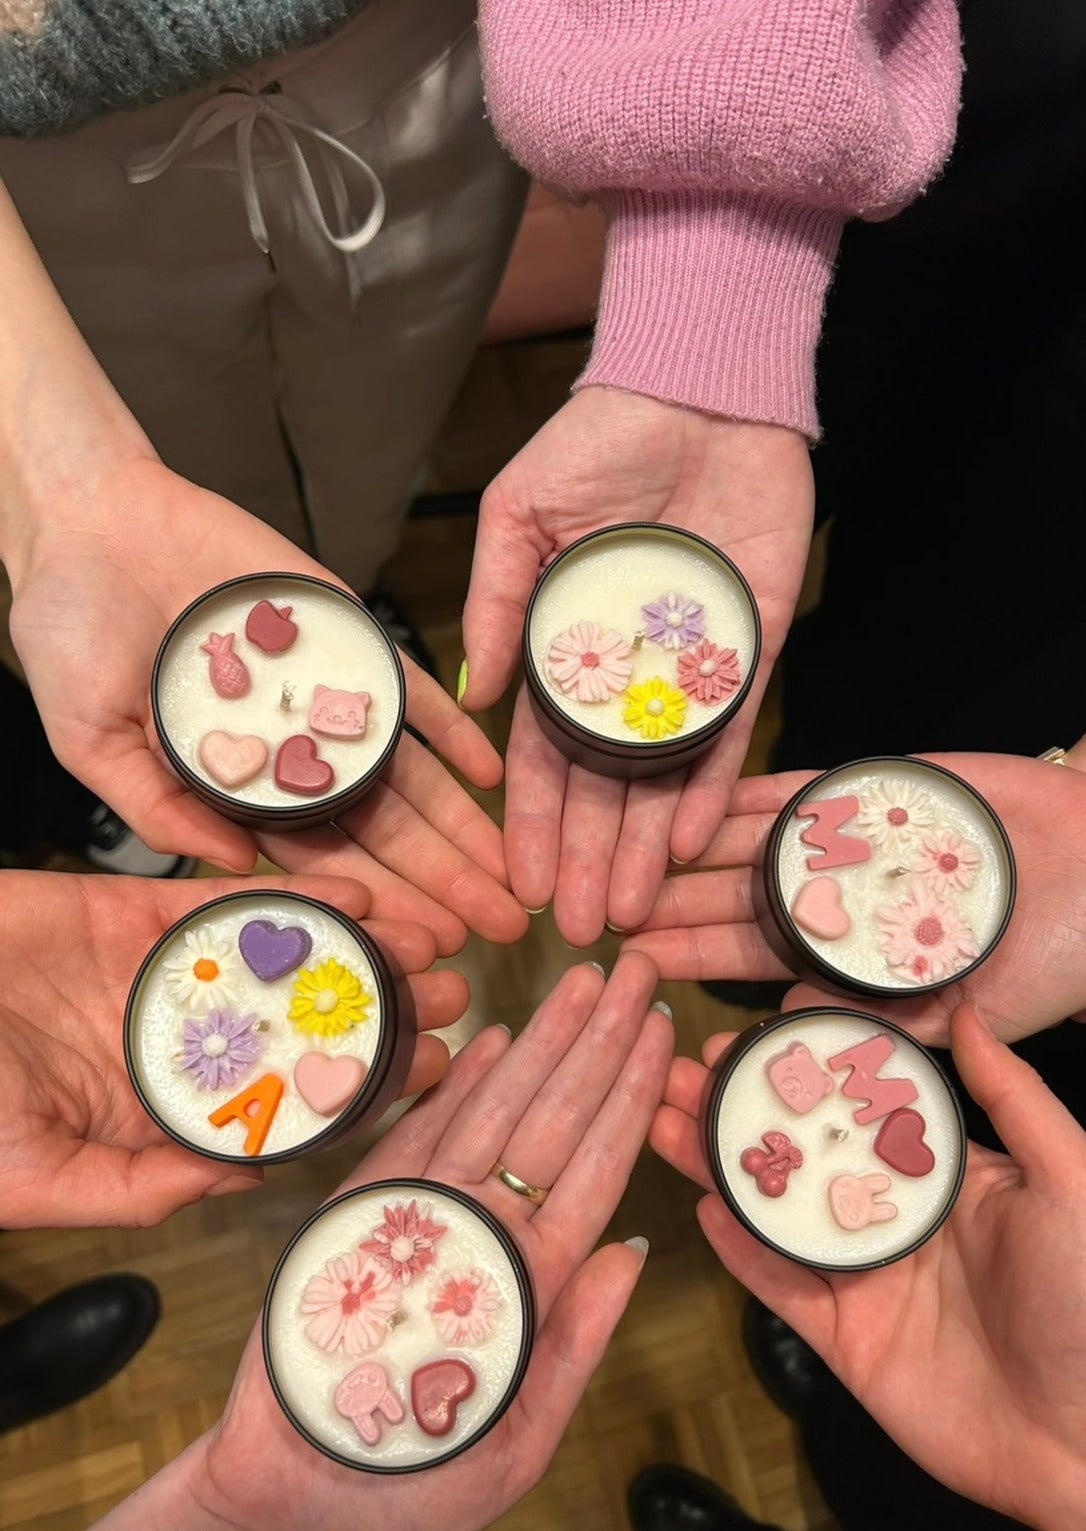 Candle Making Workshop "Soy Wax Candle with Embedded Designs" with Sofija in Berlin, Germany by subcultours